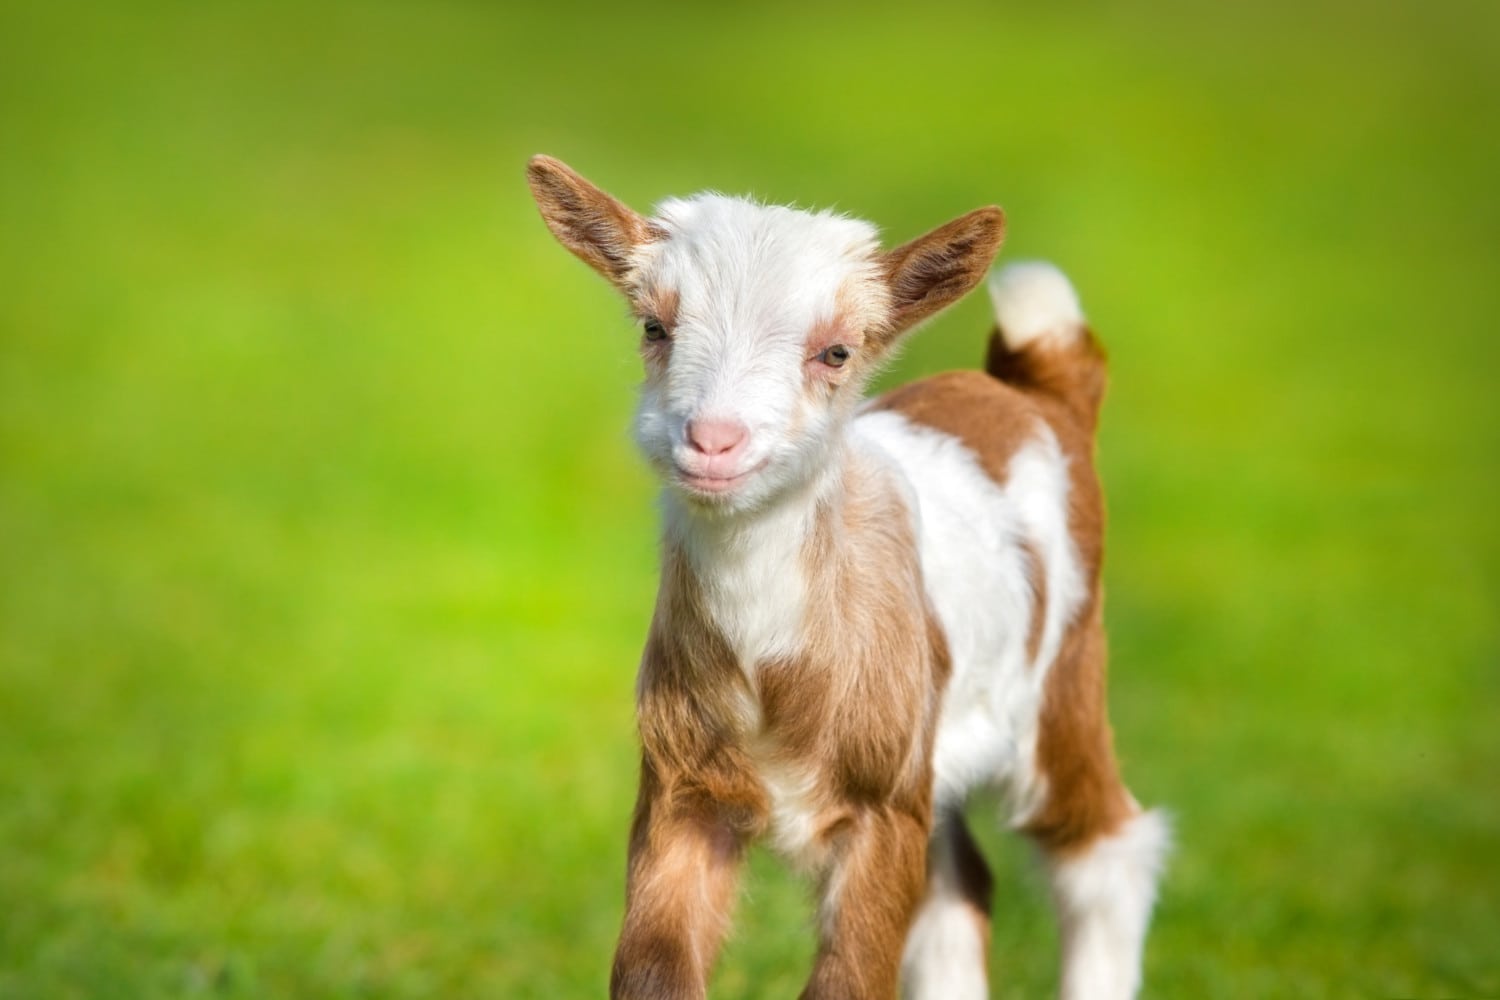 Cute baby goat kid who appears to be smiling